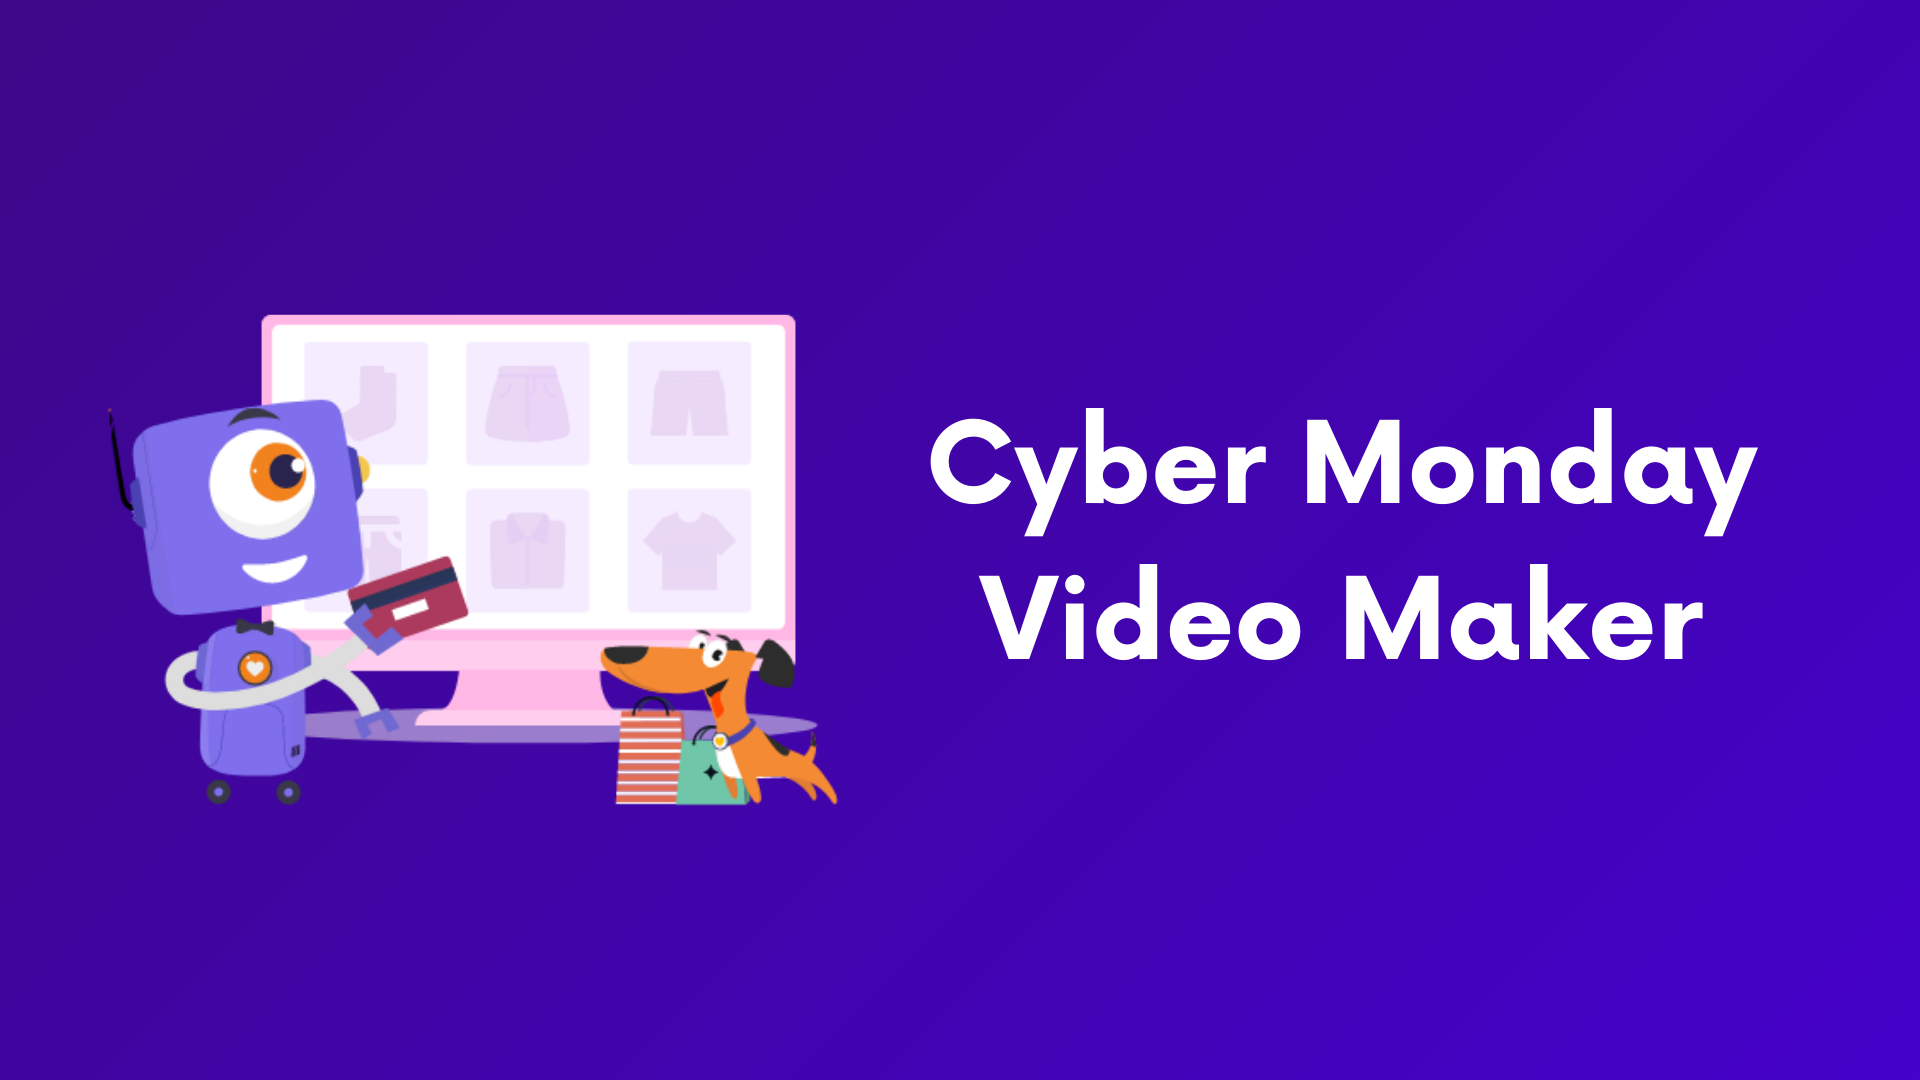 Cyber monday video maker banner image